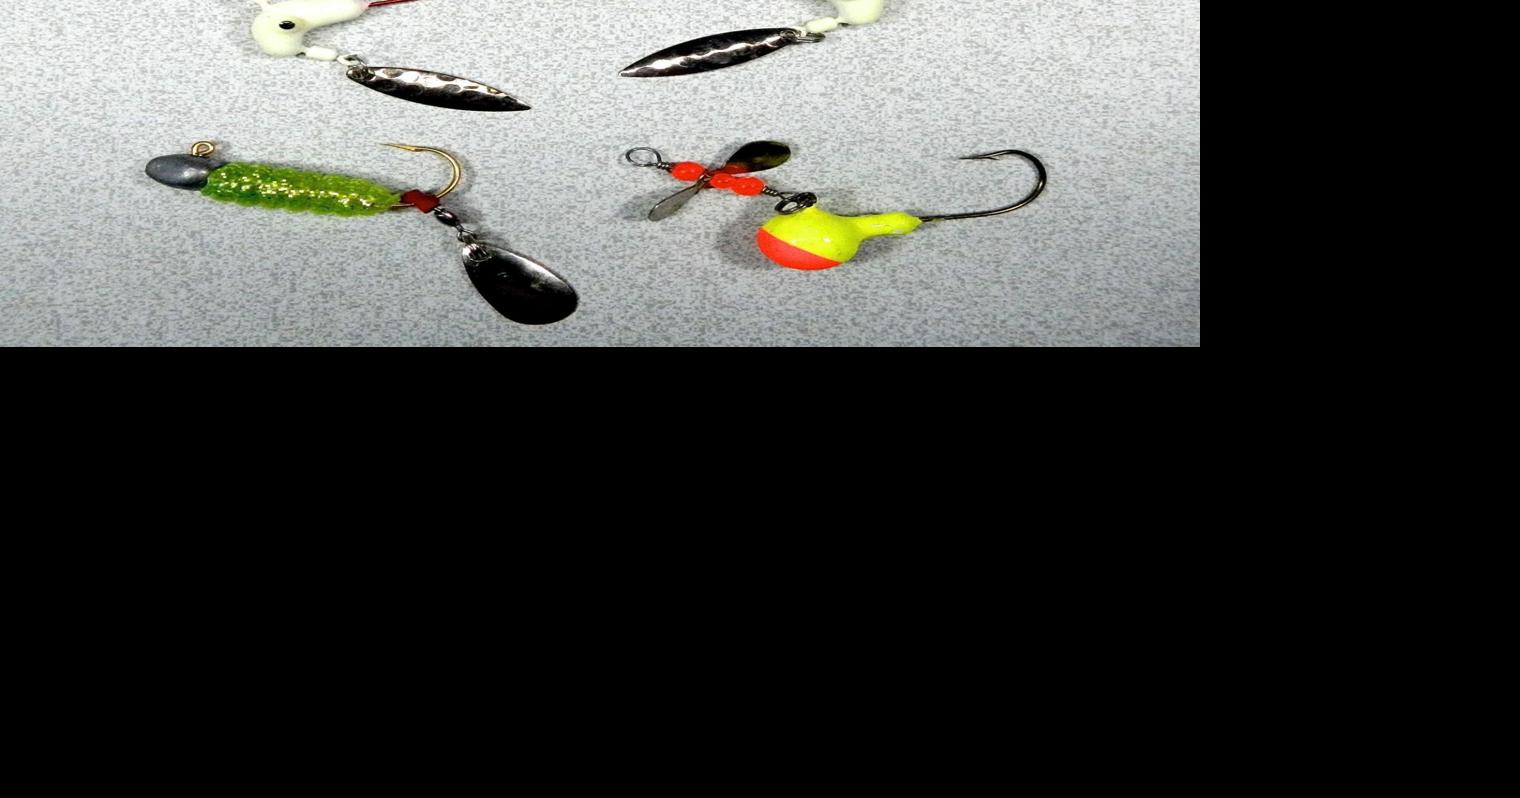 MYHRE: Spinner jigs popular choice for walleyes